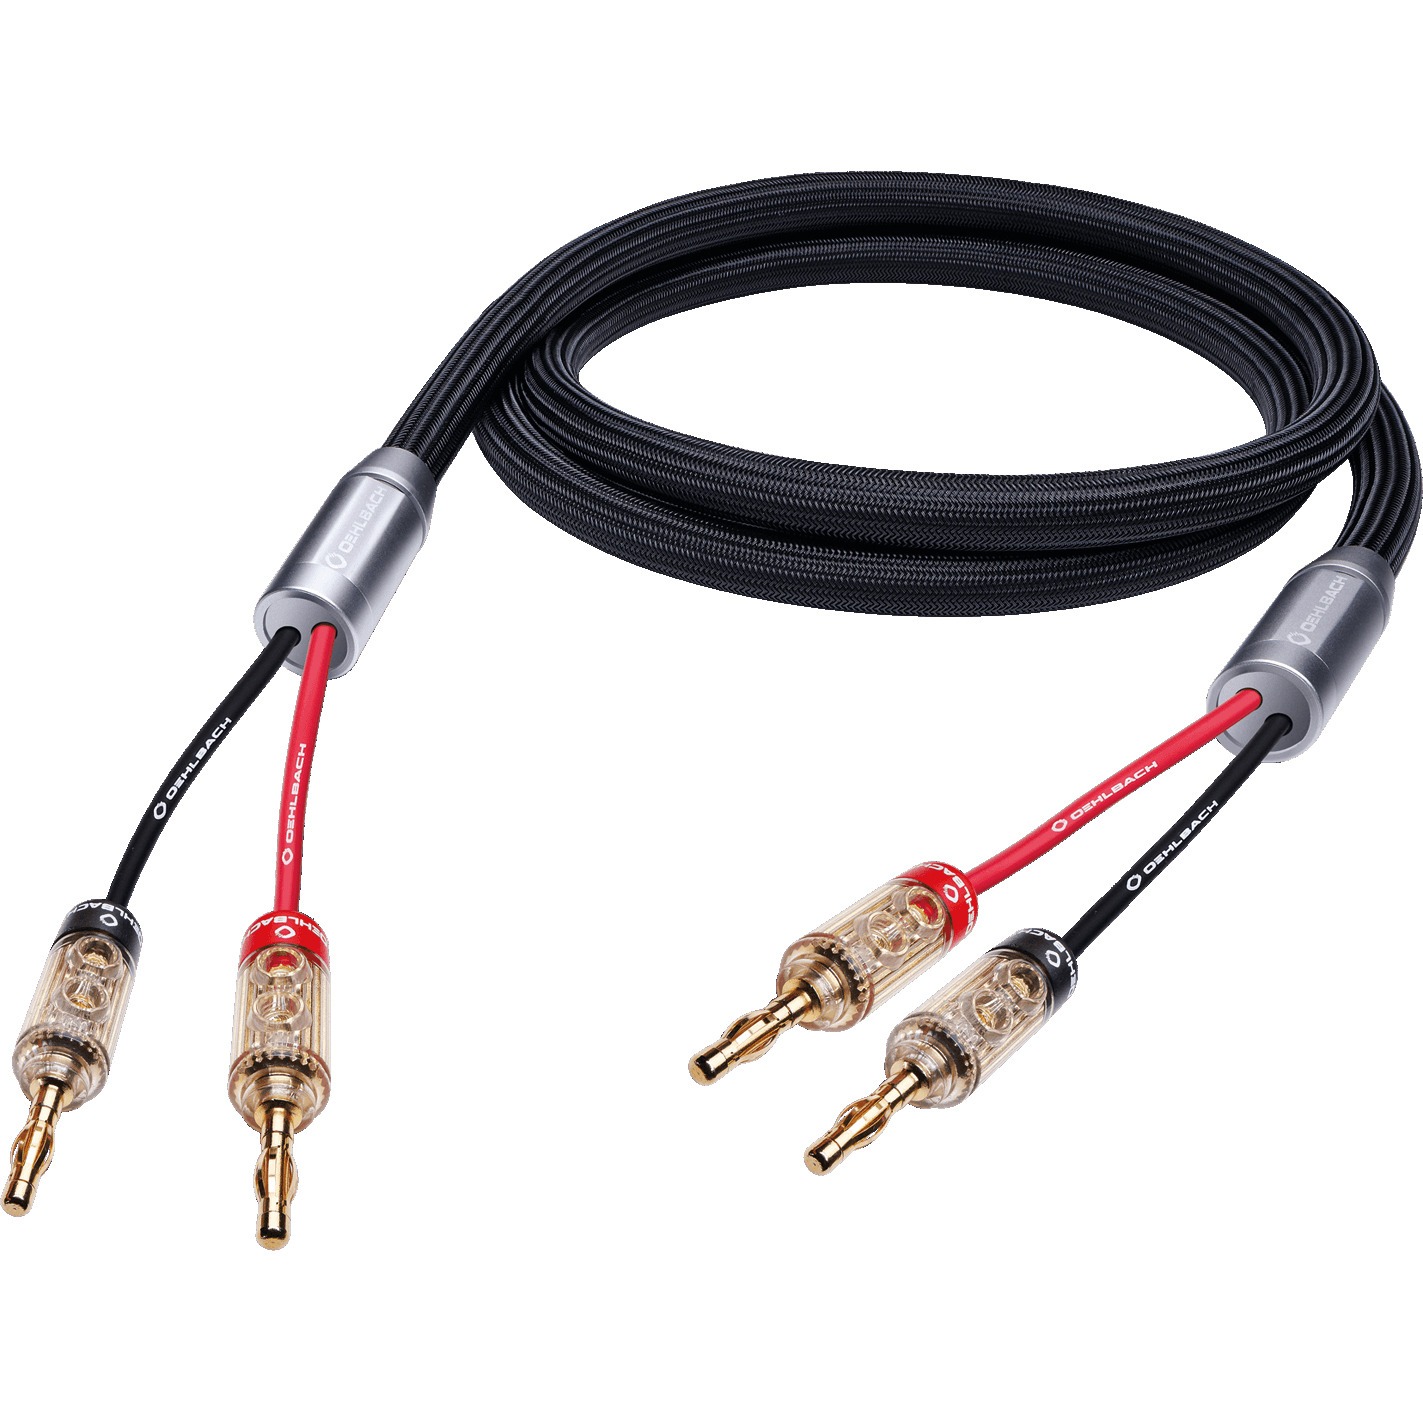 Кабели акустические с разъёмами Oehlbach STATE OF THE ART XXL Fusion Two Cable Set, 2x3,5 w.banana, D1C110614 hair extensions iron for fusion heat connector wand adjustable temperature melting tool new dropship